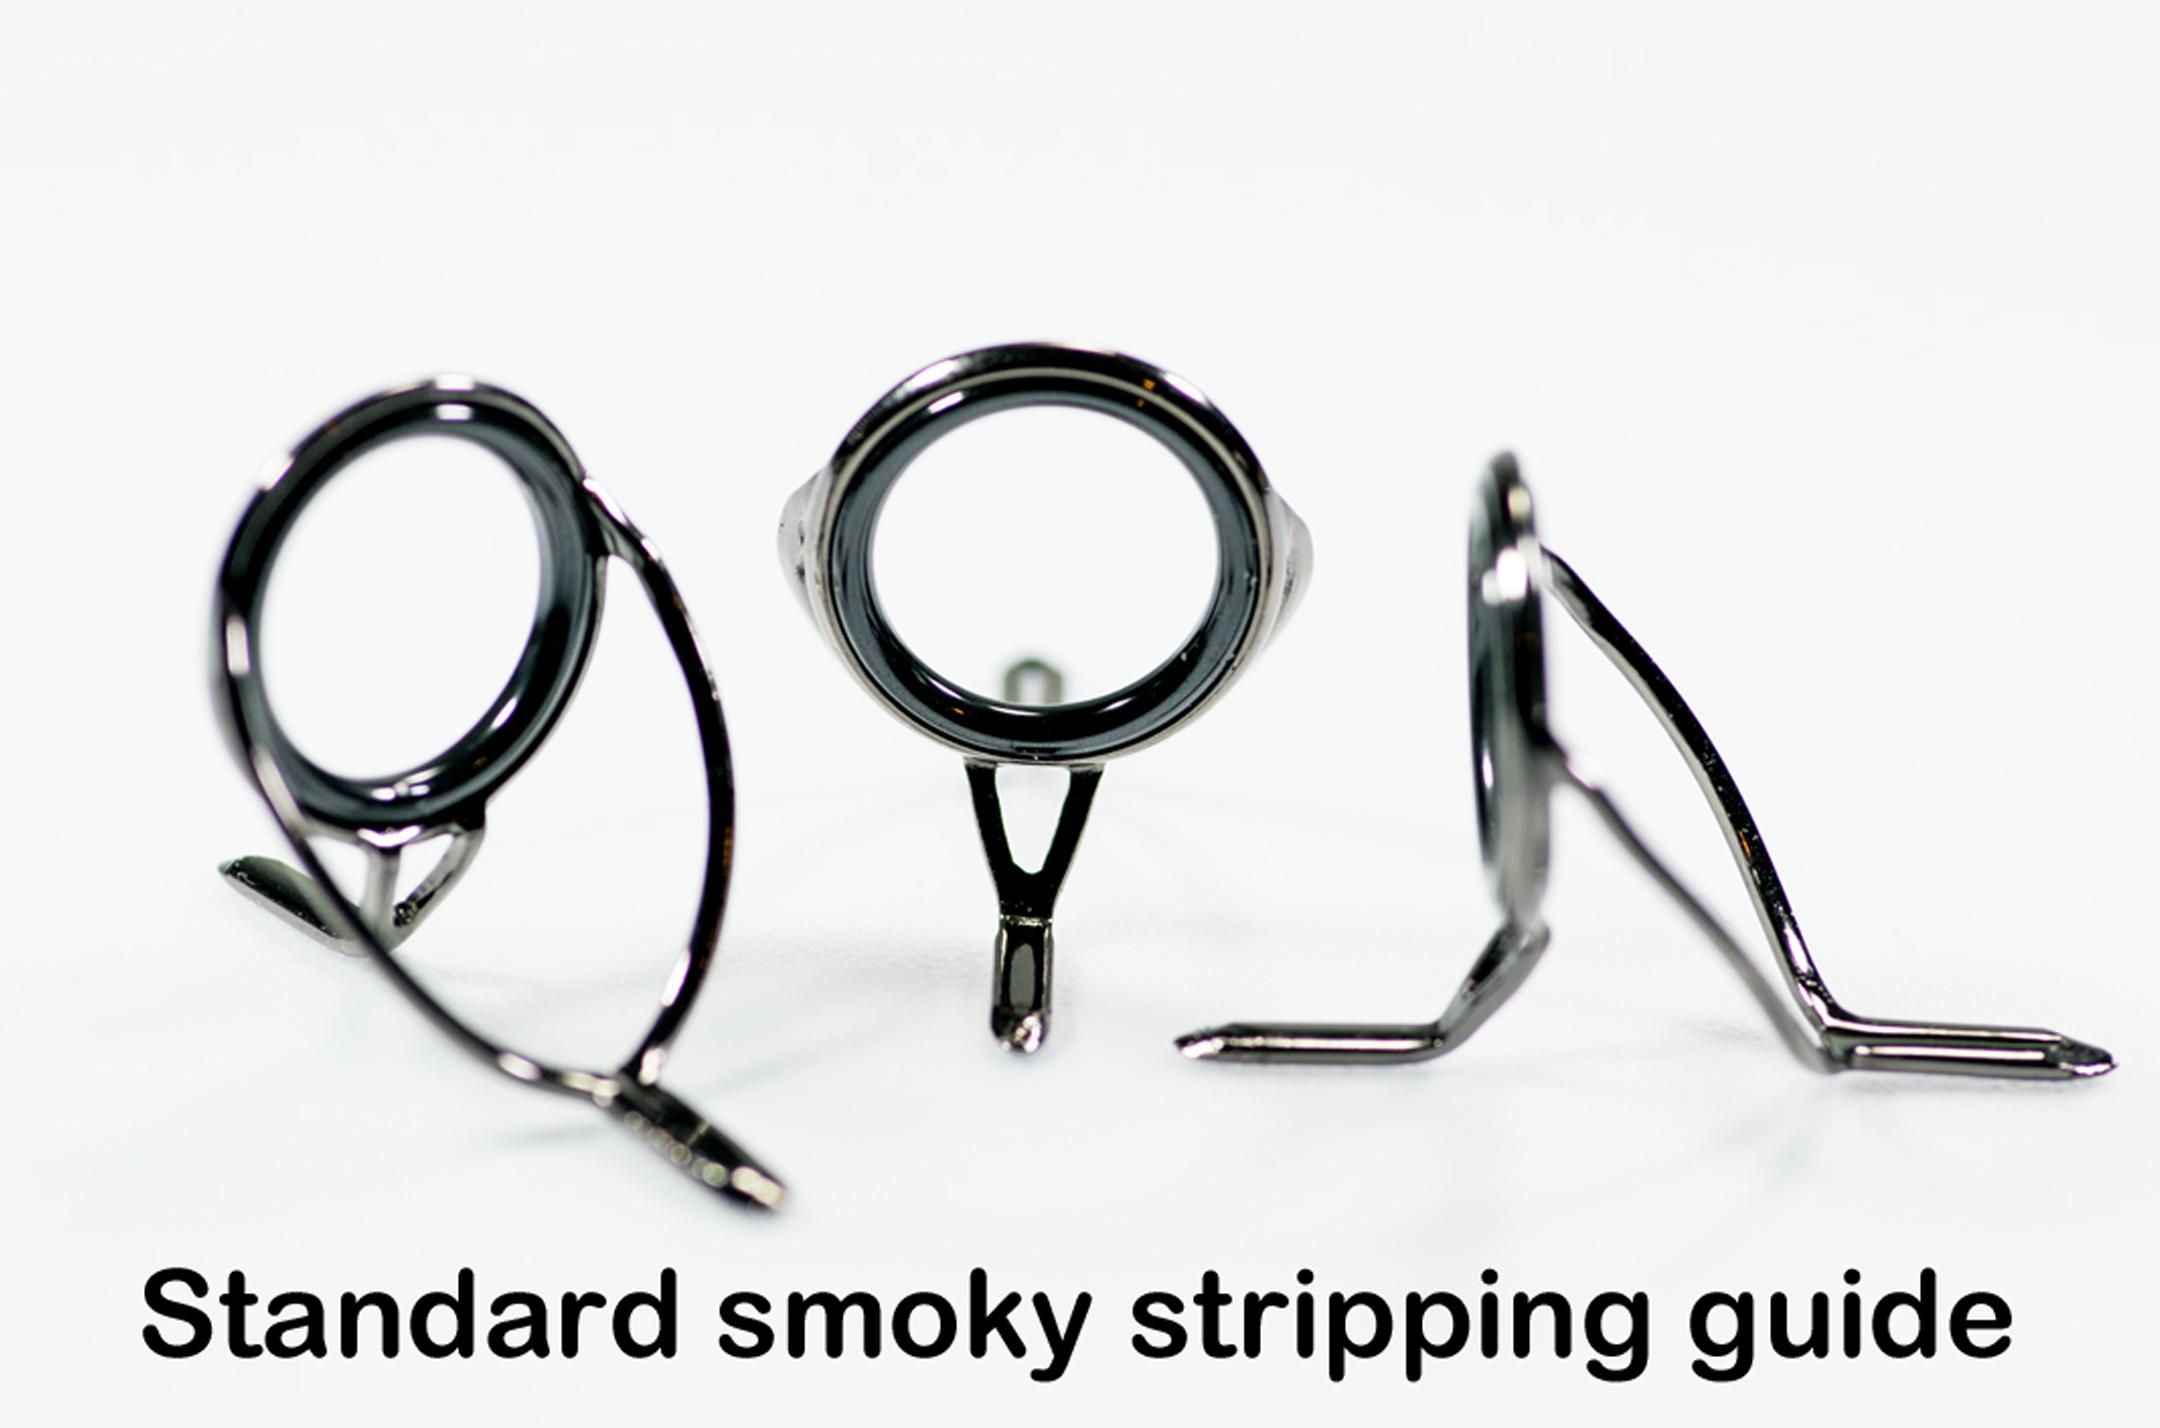 Standard upright stripping guide